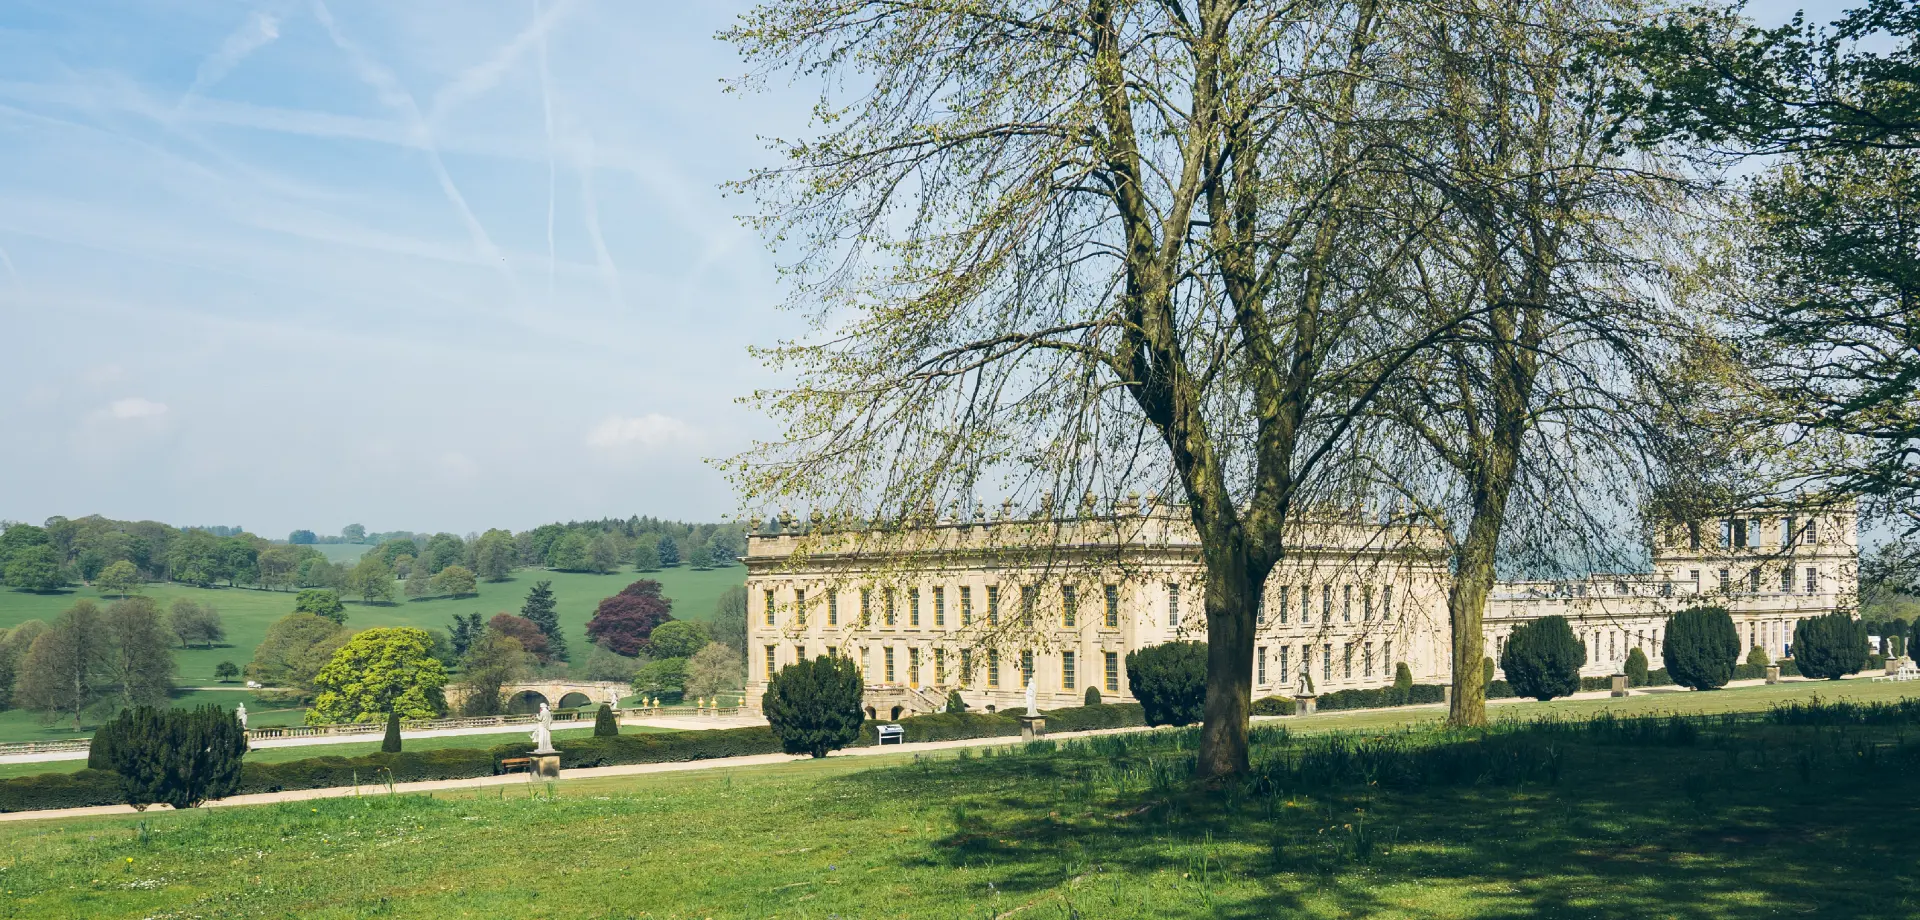 Work Placements For Young People On Offer at Chatsworth Under New Kickstart Scheme